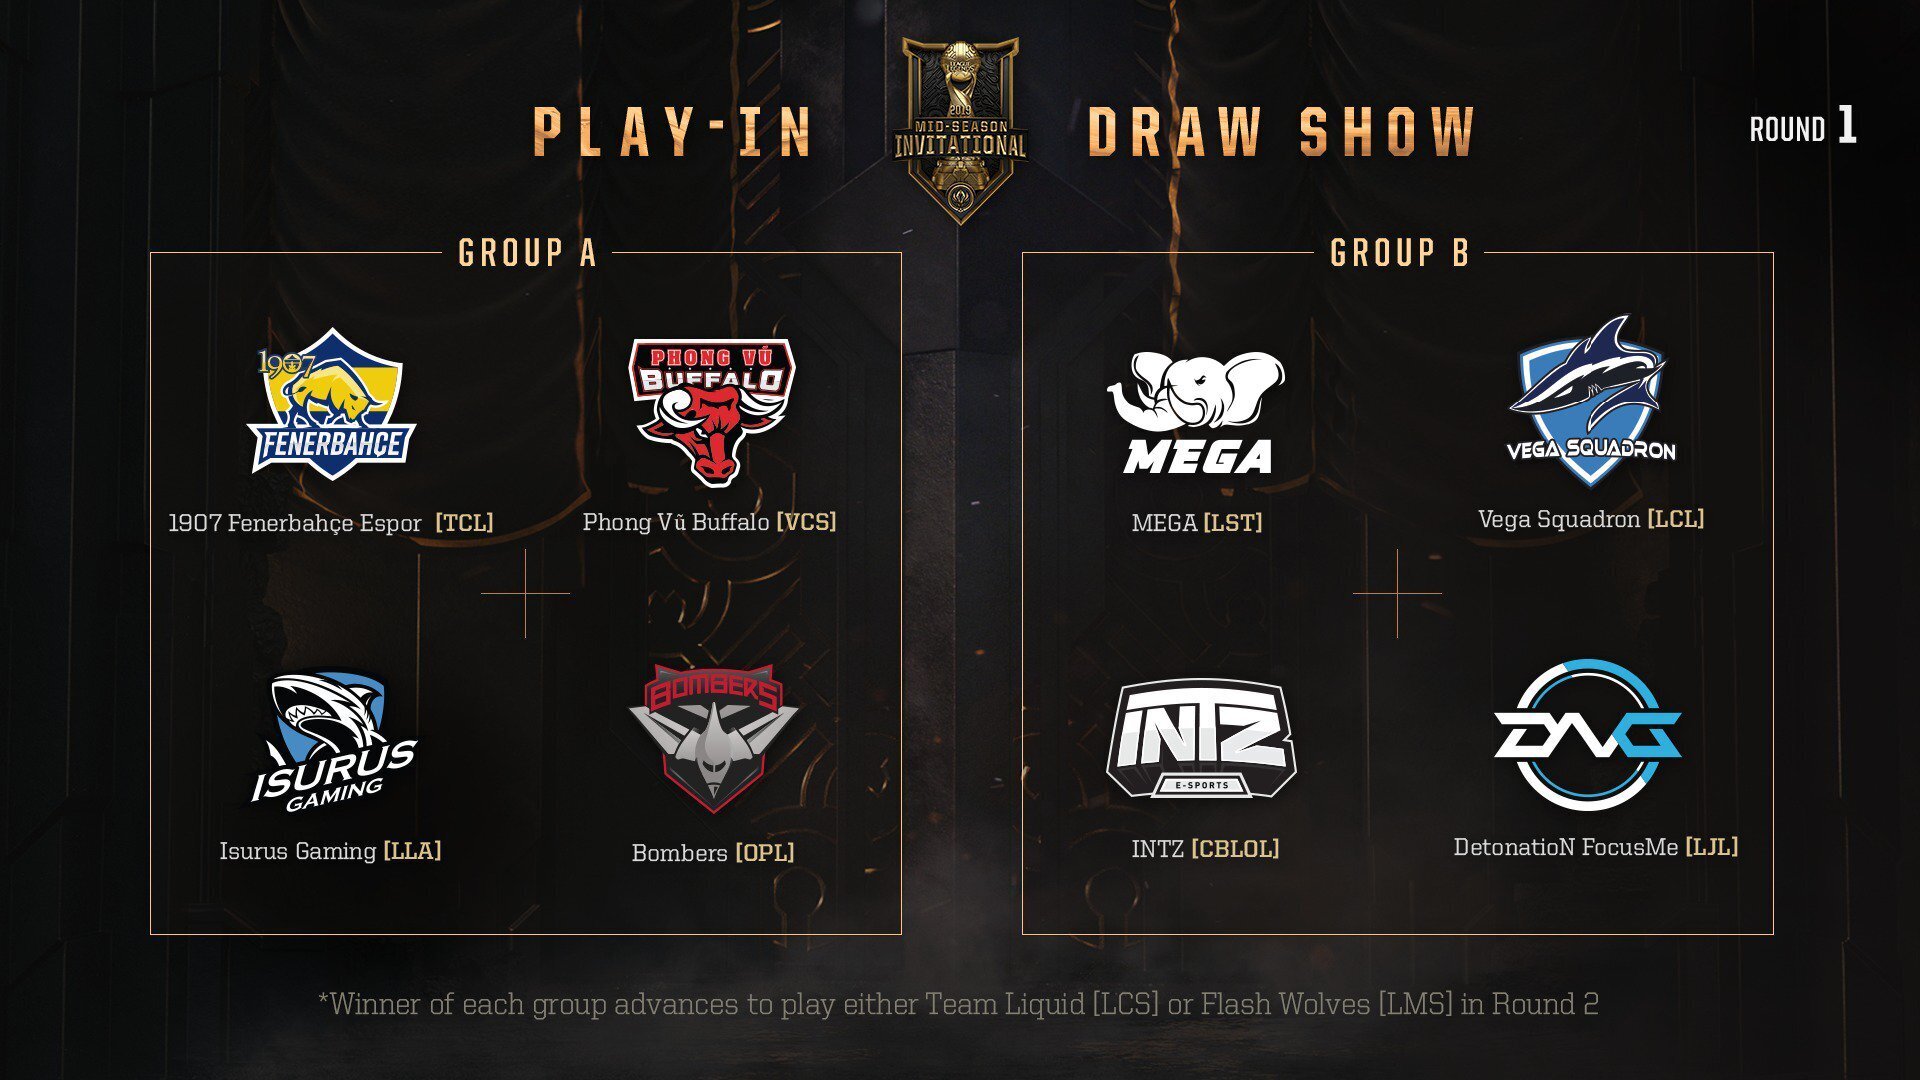 Group A of the MSI Play-In Stage appears to be the "group of death" with two of the favorites in the grouping. (Image courtesy of LoL Esports)